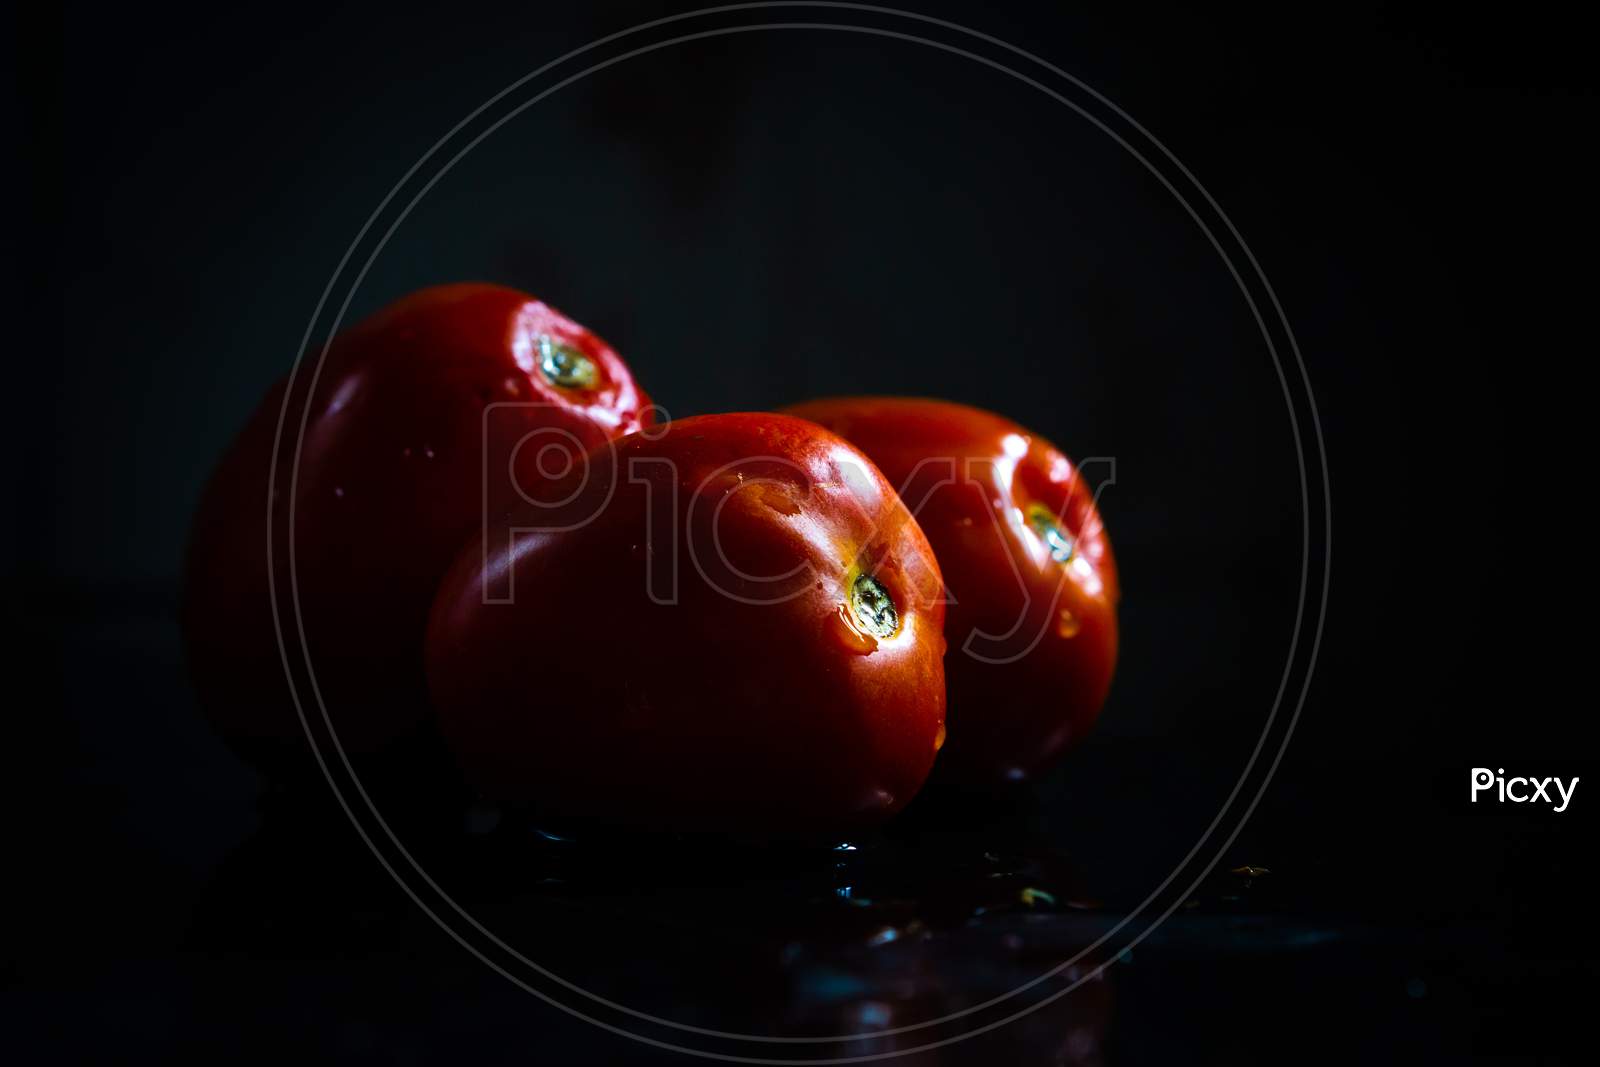 Juicy Tomato In A Group On A Dark Background